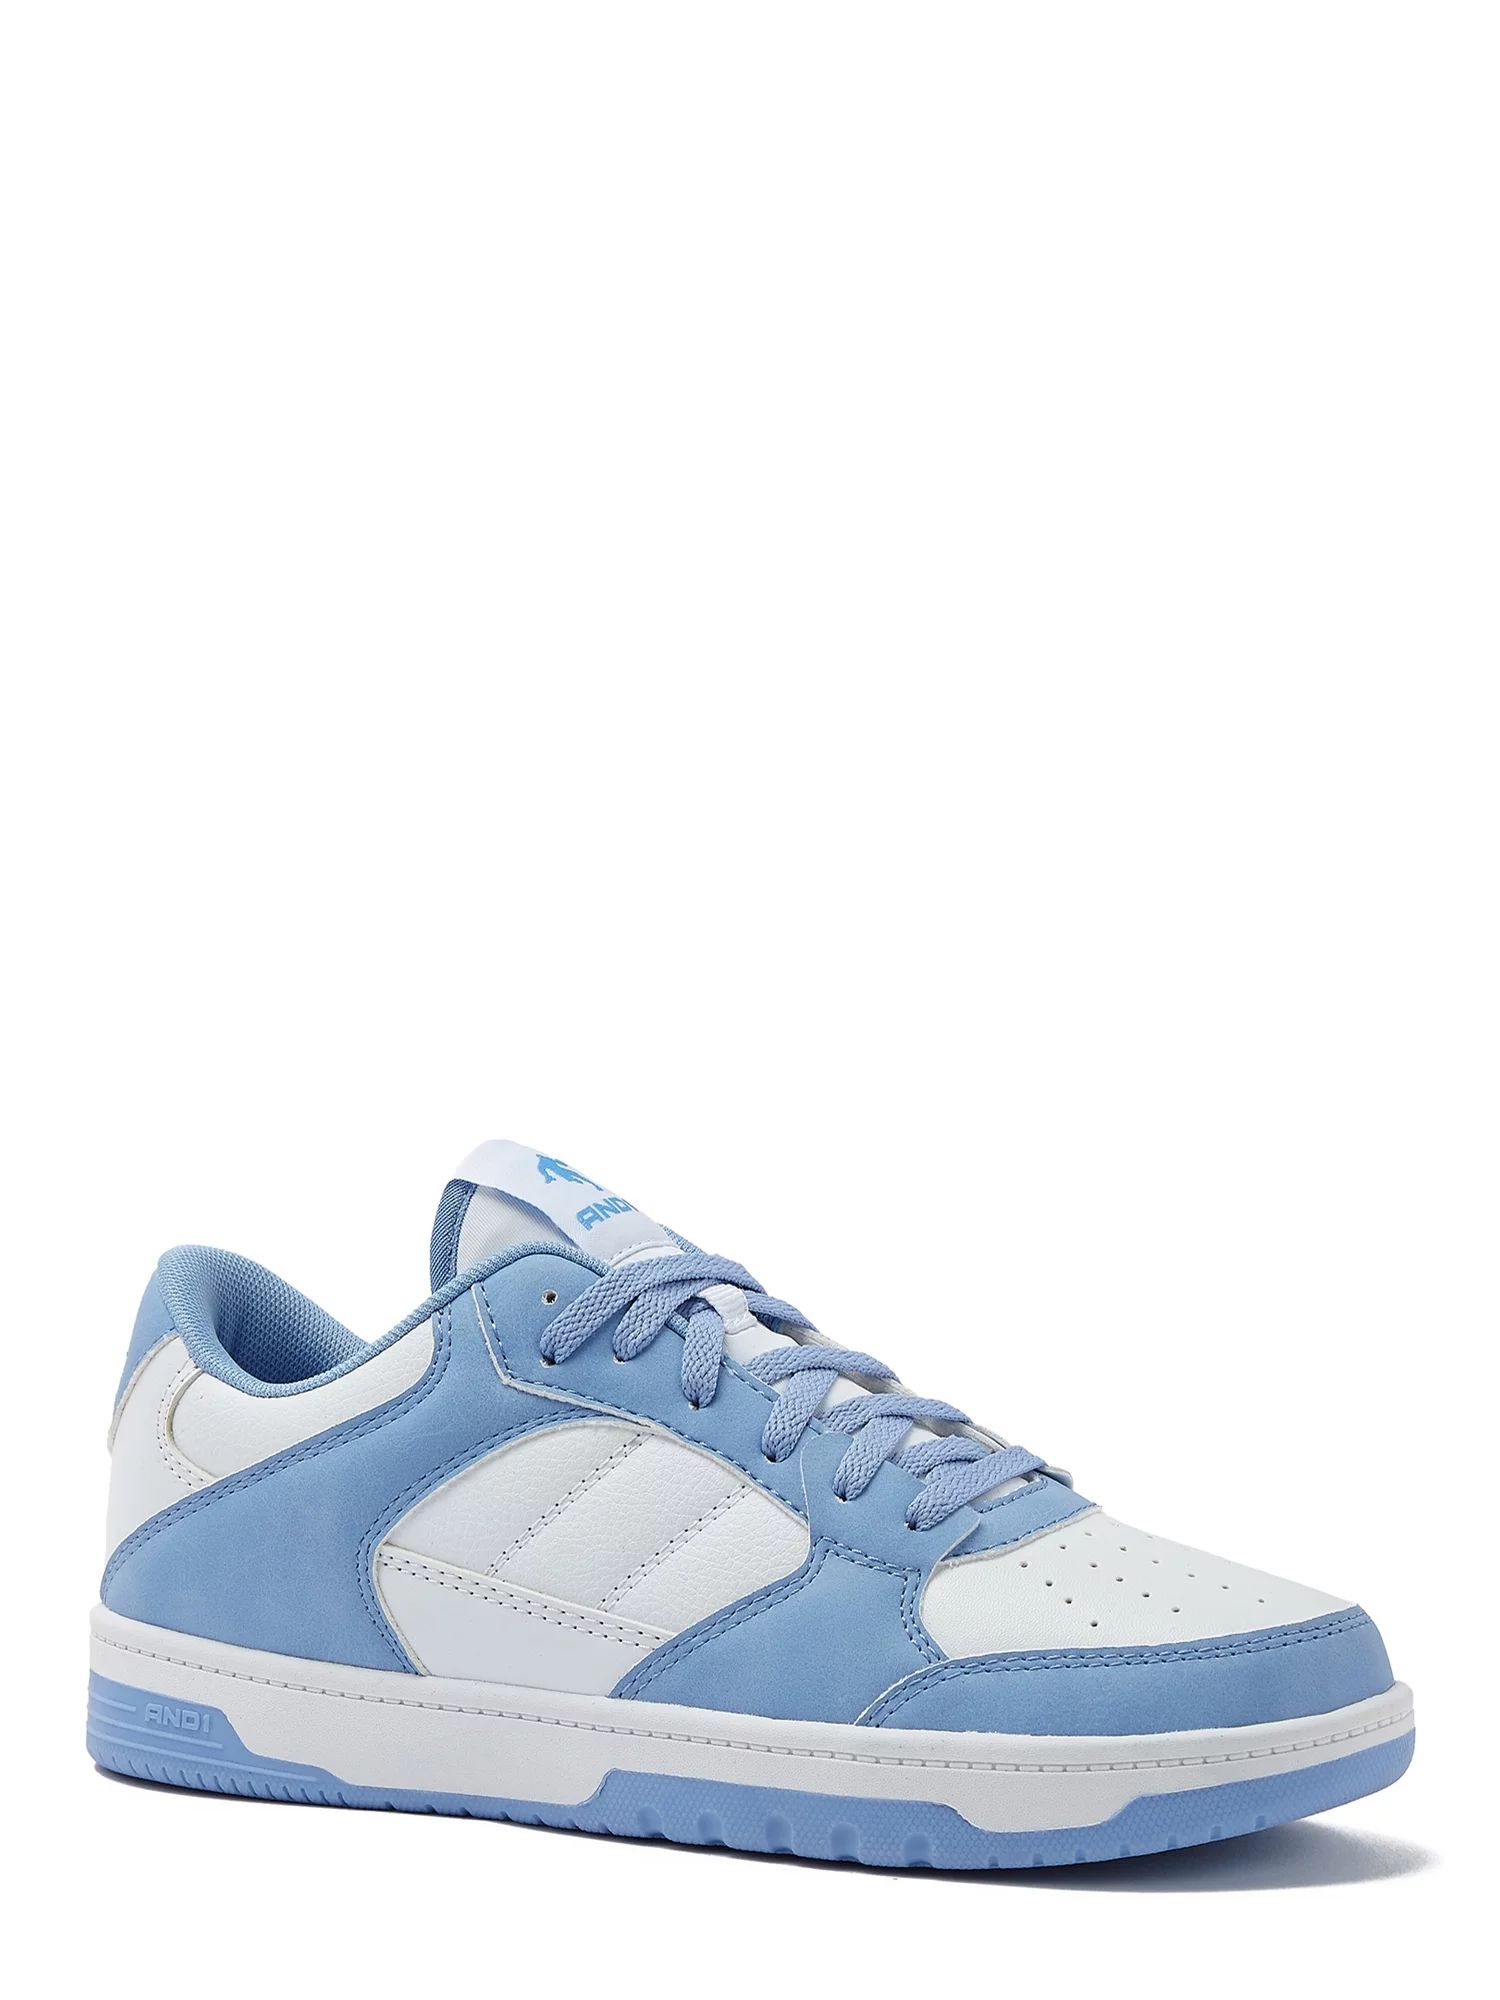 AND1 Women’s Low Top Basketball Sneaker, Wide Width Available | Walmart (US)